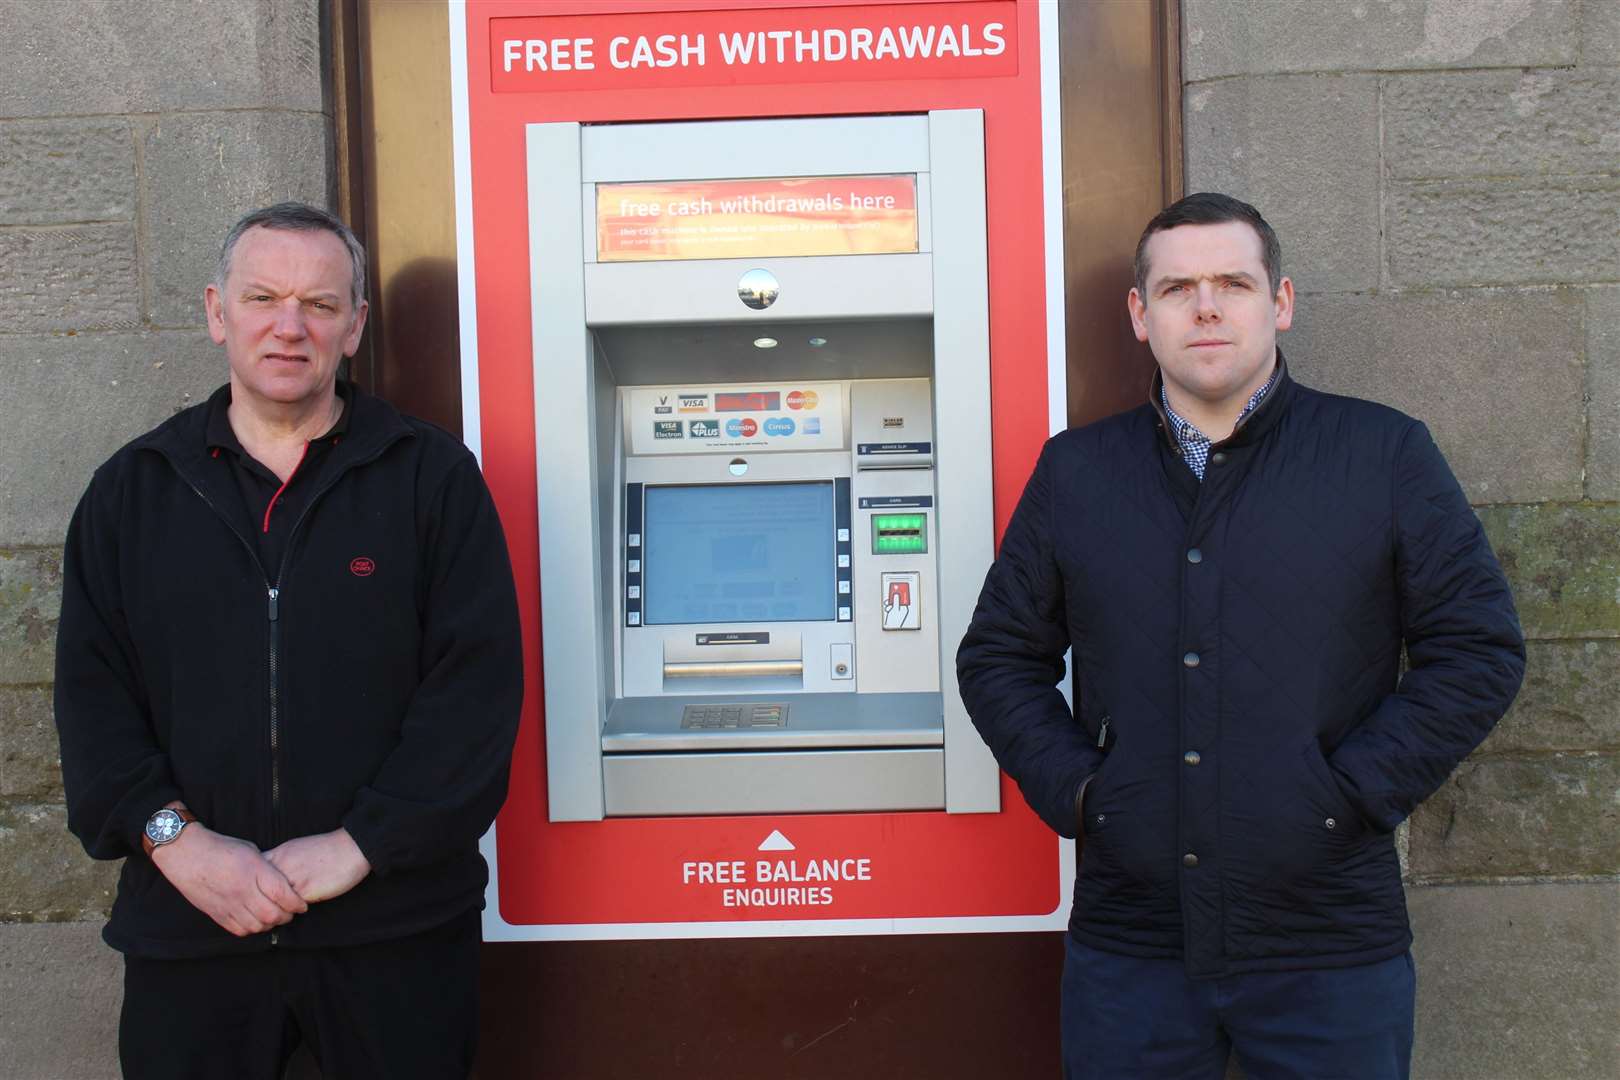 Postmaster Paul McBain (left) with Moray MP Douglas Ross beside the ATM in question.